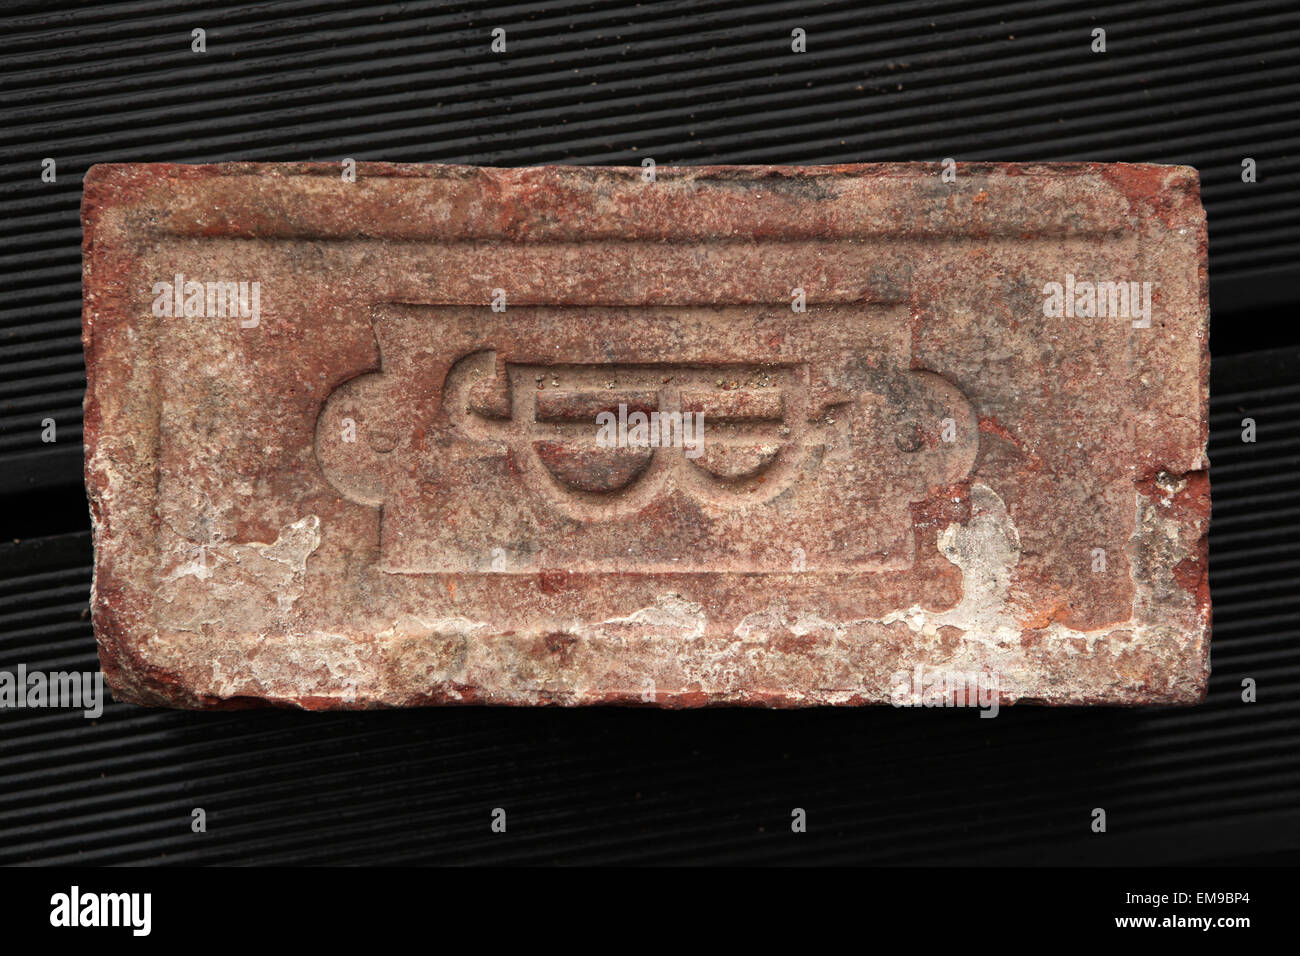 Monogram J.B. sealed on an old brick produced in the 19th century in Bohemia, Austro-Hungarian Empire. Stock Photo